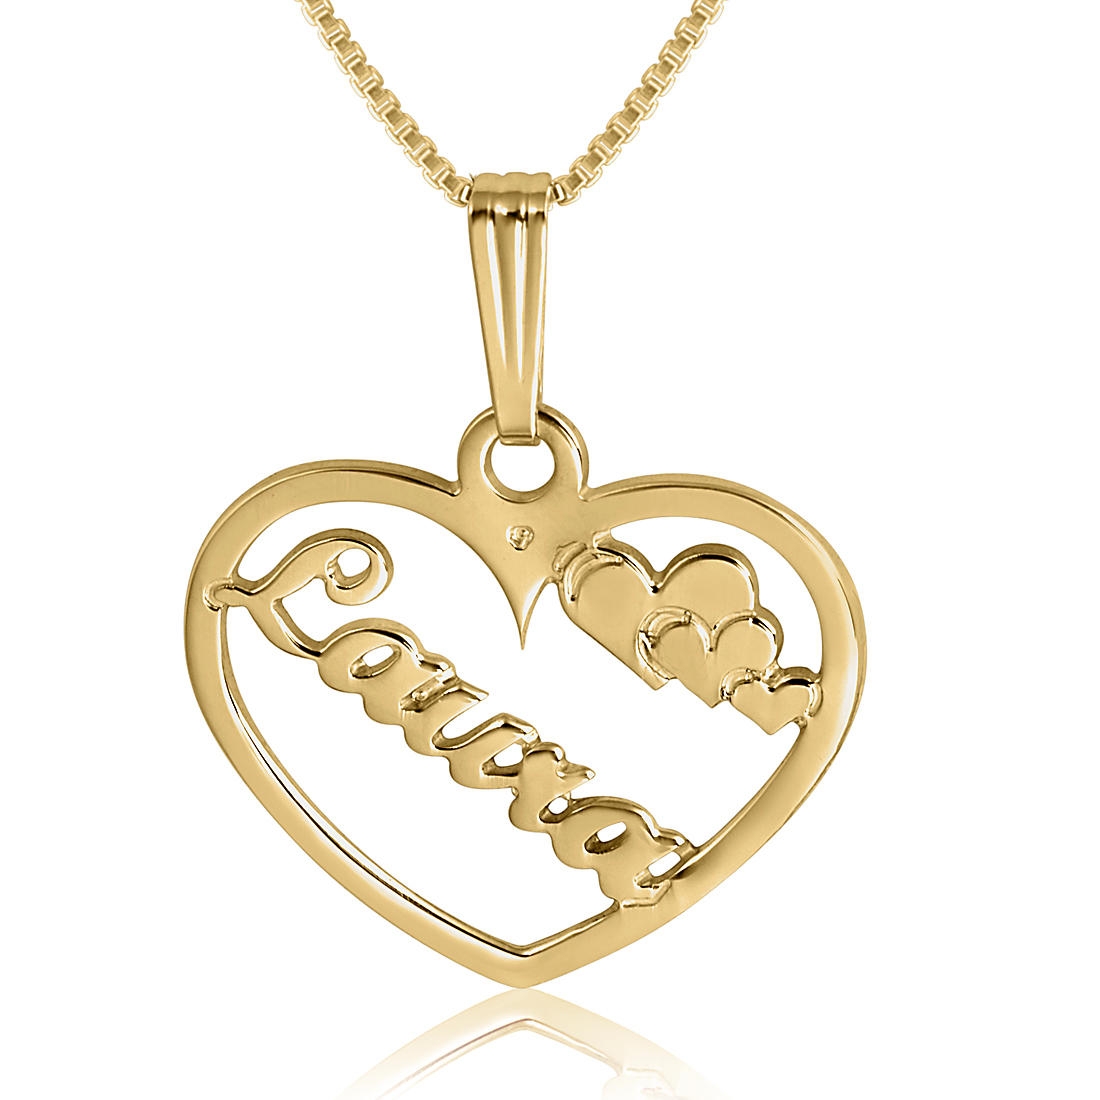 Romantic Name Necklace, Love My Name, 24k Gold Plated - 1